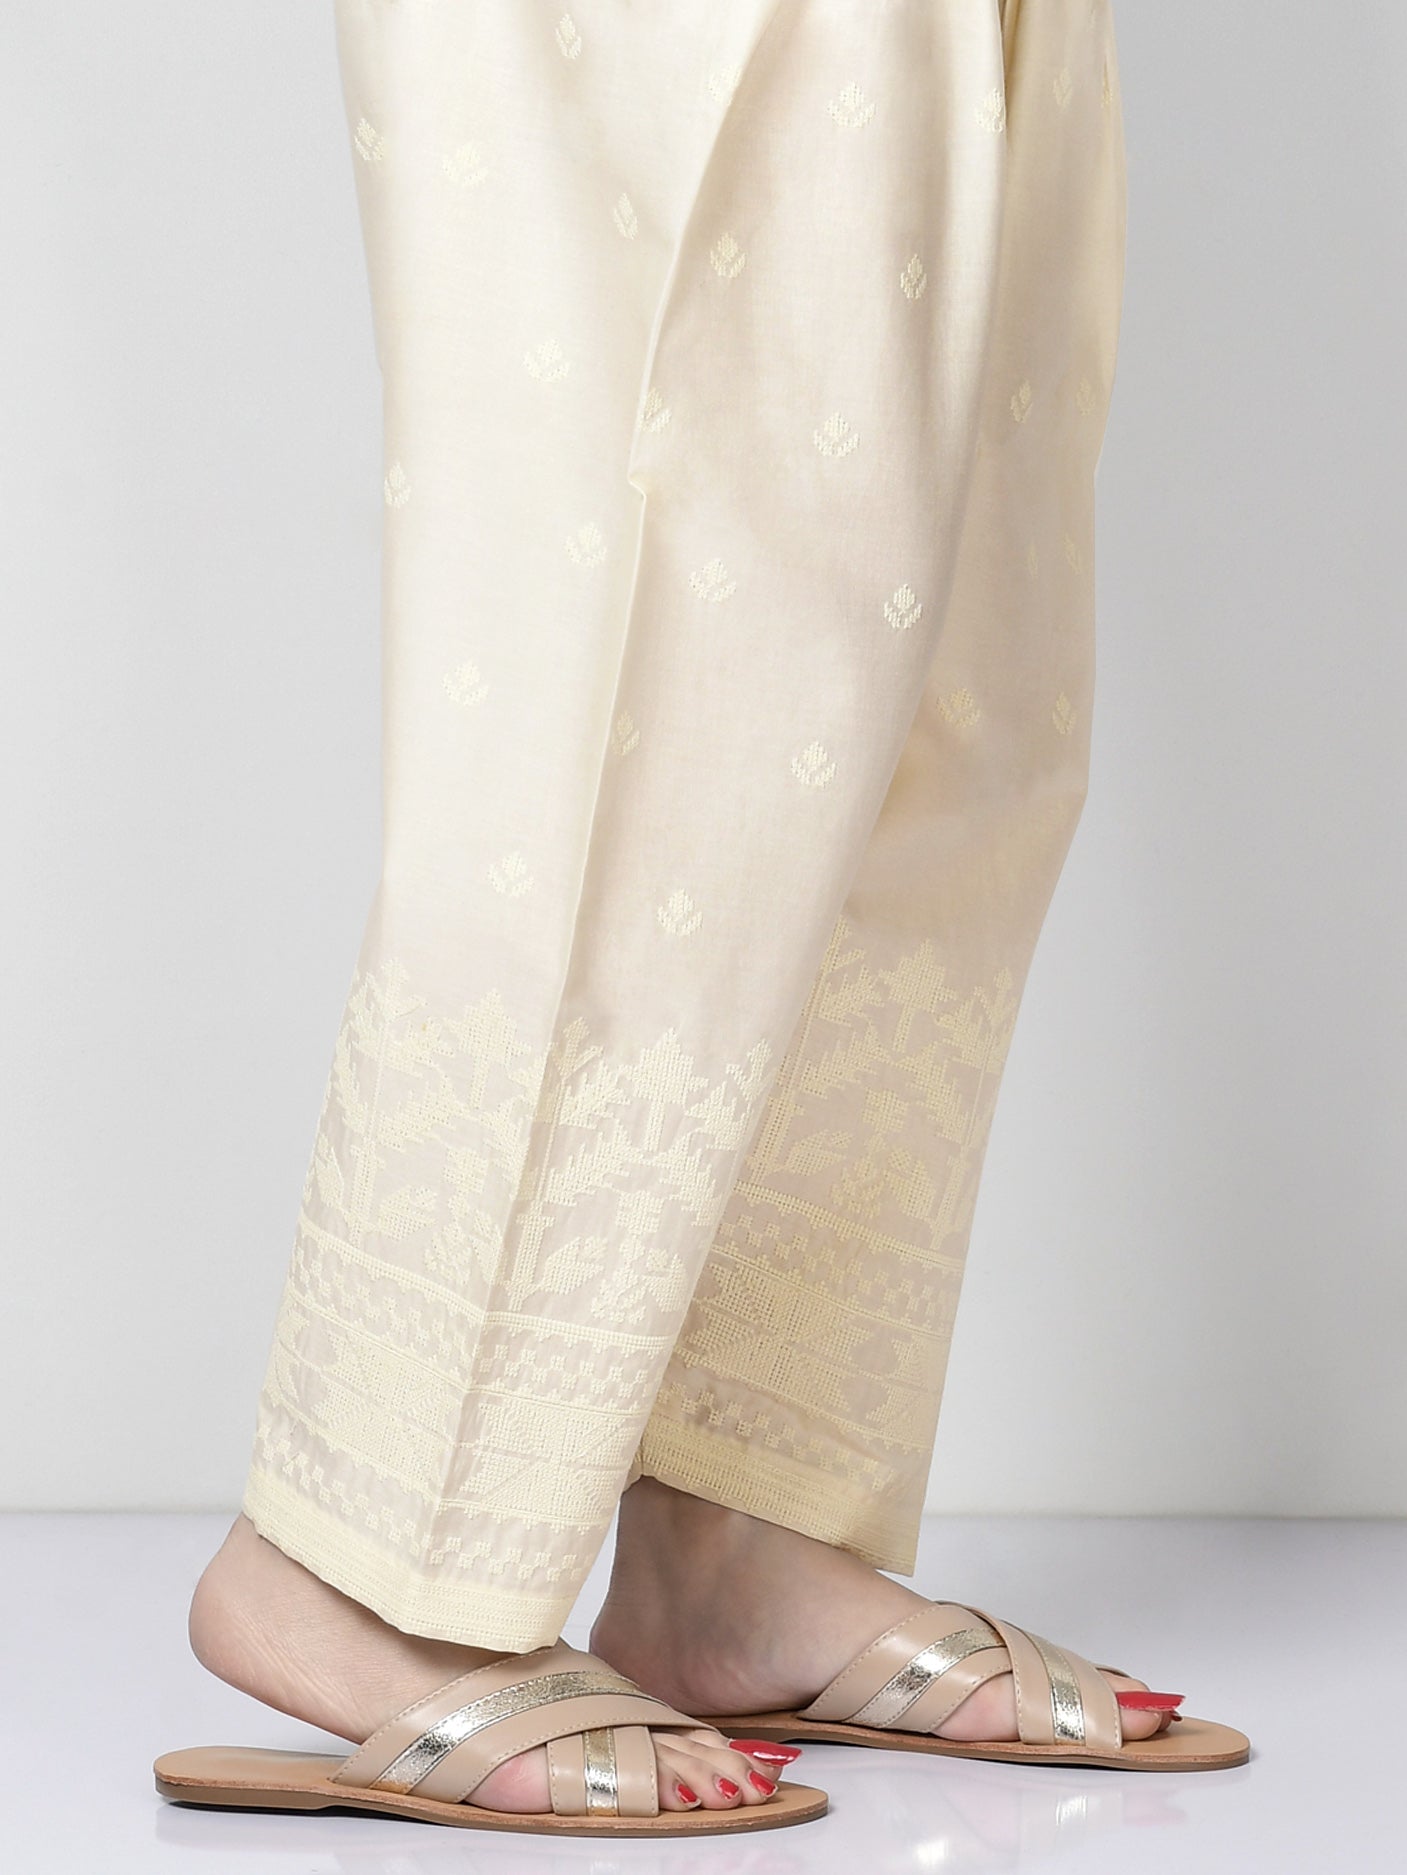 Embroidered Winter Cotton Pants